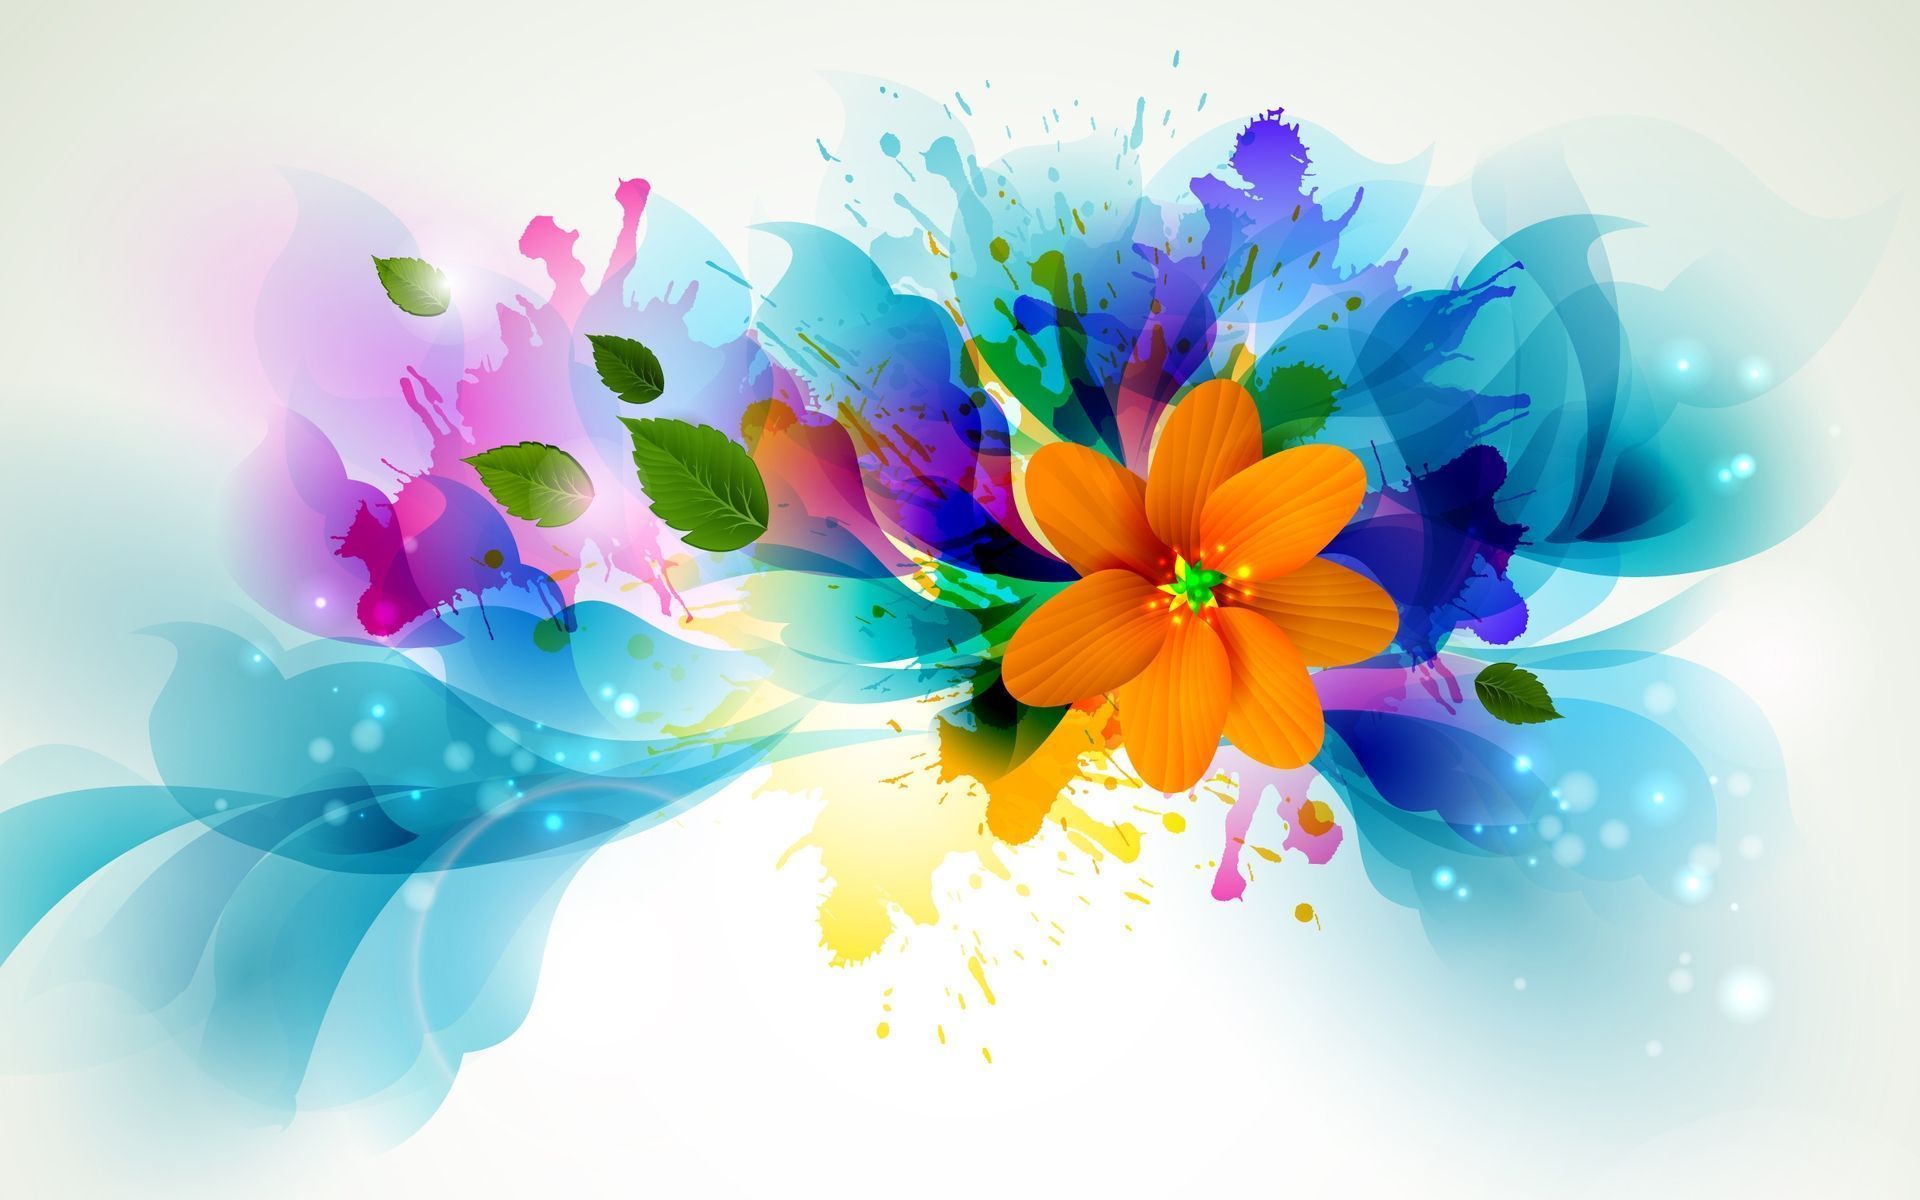 Pictures Of Bright Flowers - Desktop Backgrounds